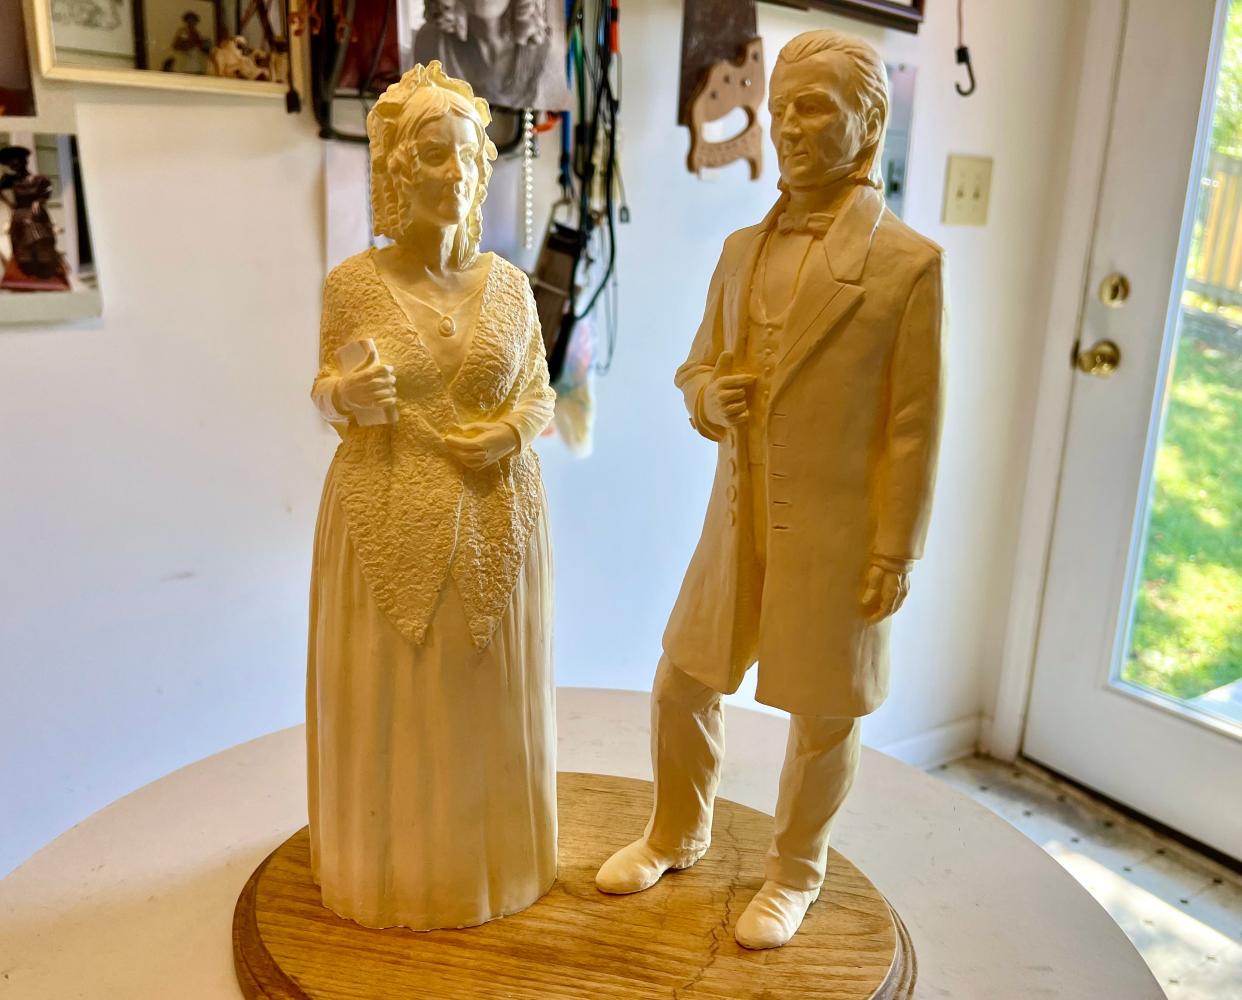 Scale models of James and Sarah Polk were created as part of the Polks at Preservation Park, which will feature life-size bronze statues created by local artist Jennifer Grisham.